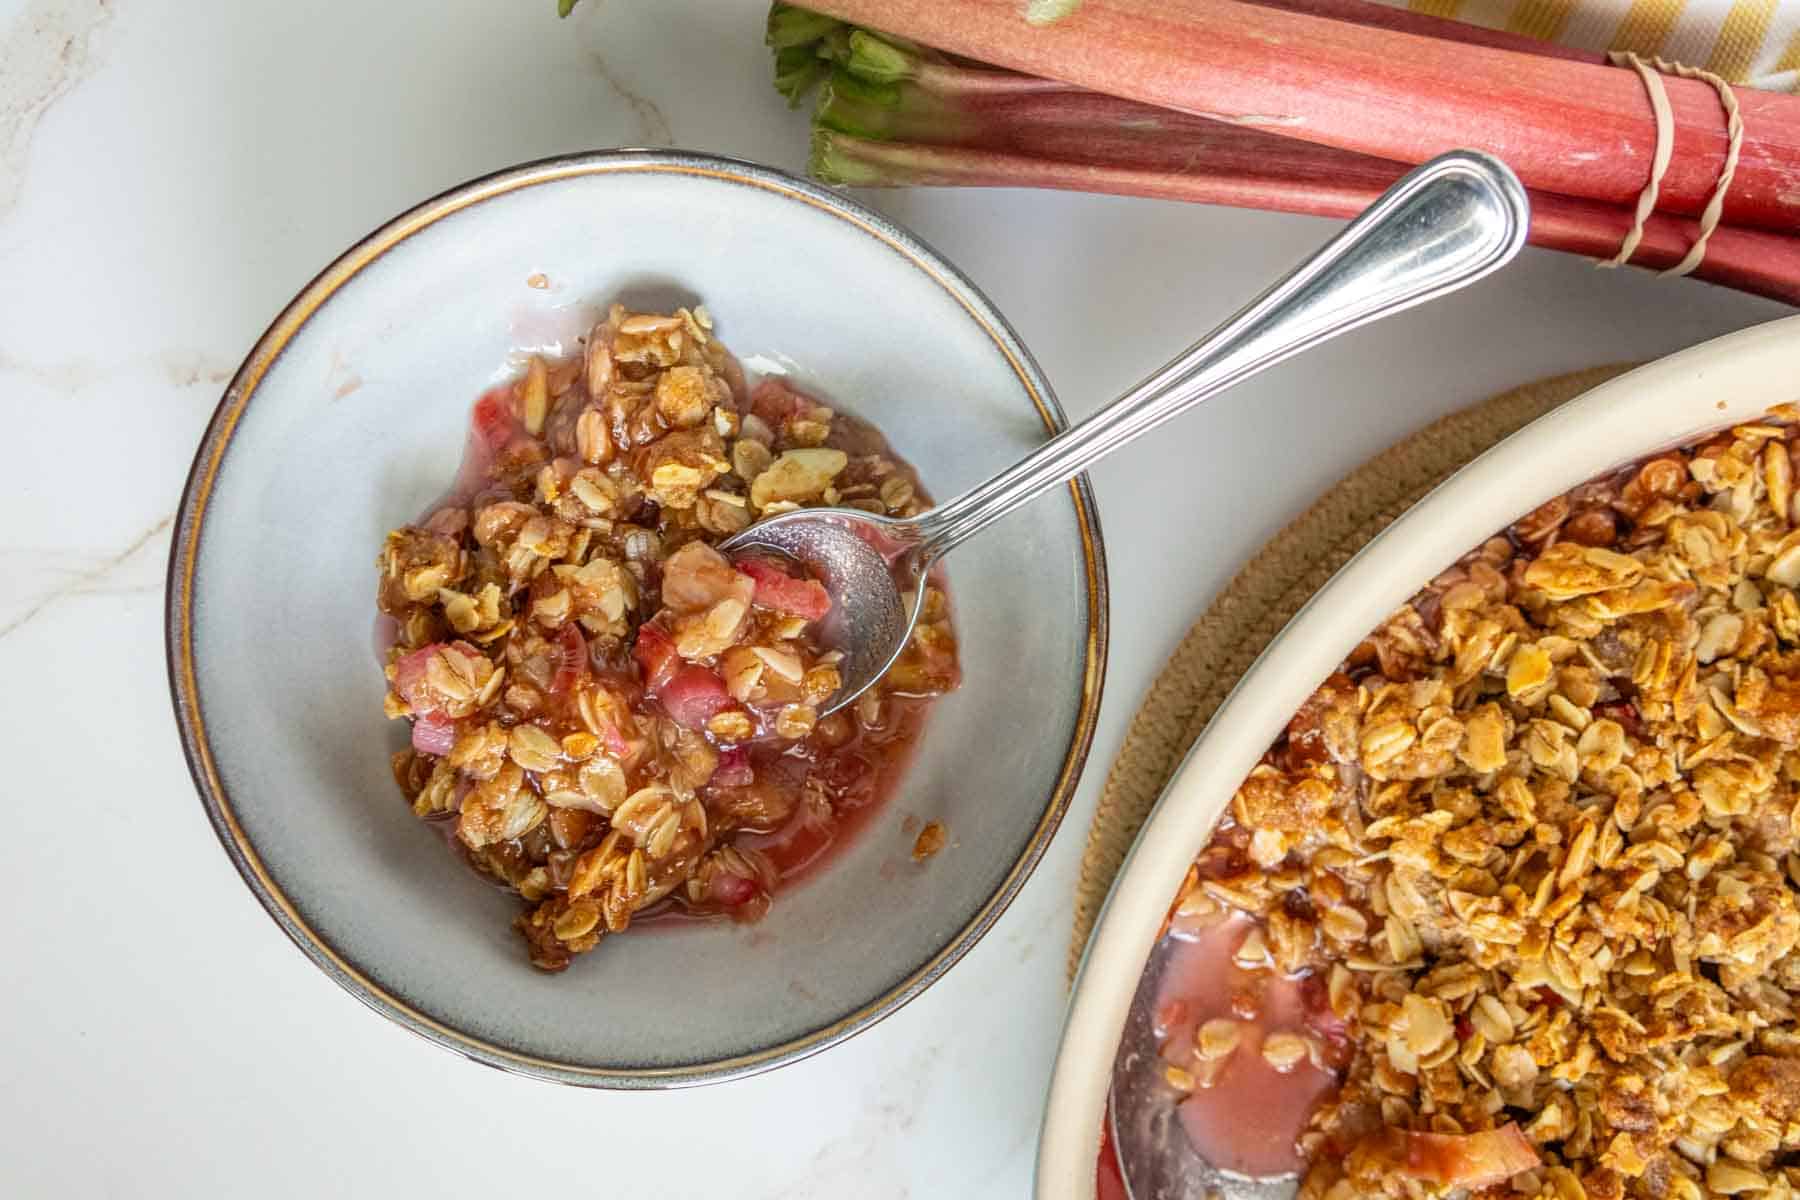 A bowl of rhubarb crumble with a spoon, beside a larger dish of the same dessert and fresh rhubarb stalks on a marble surface.